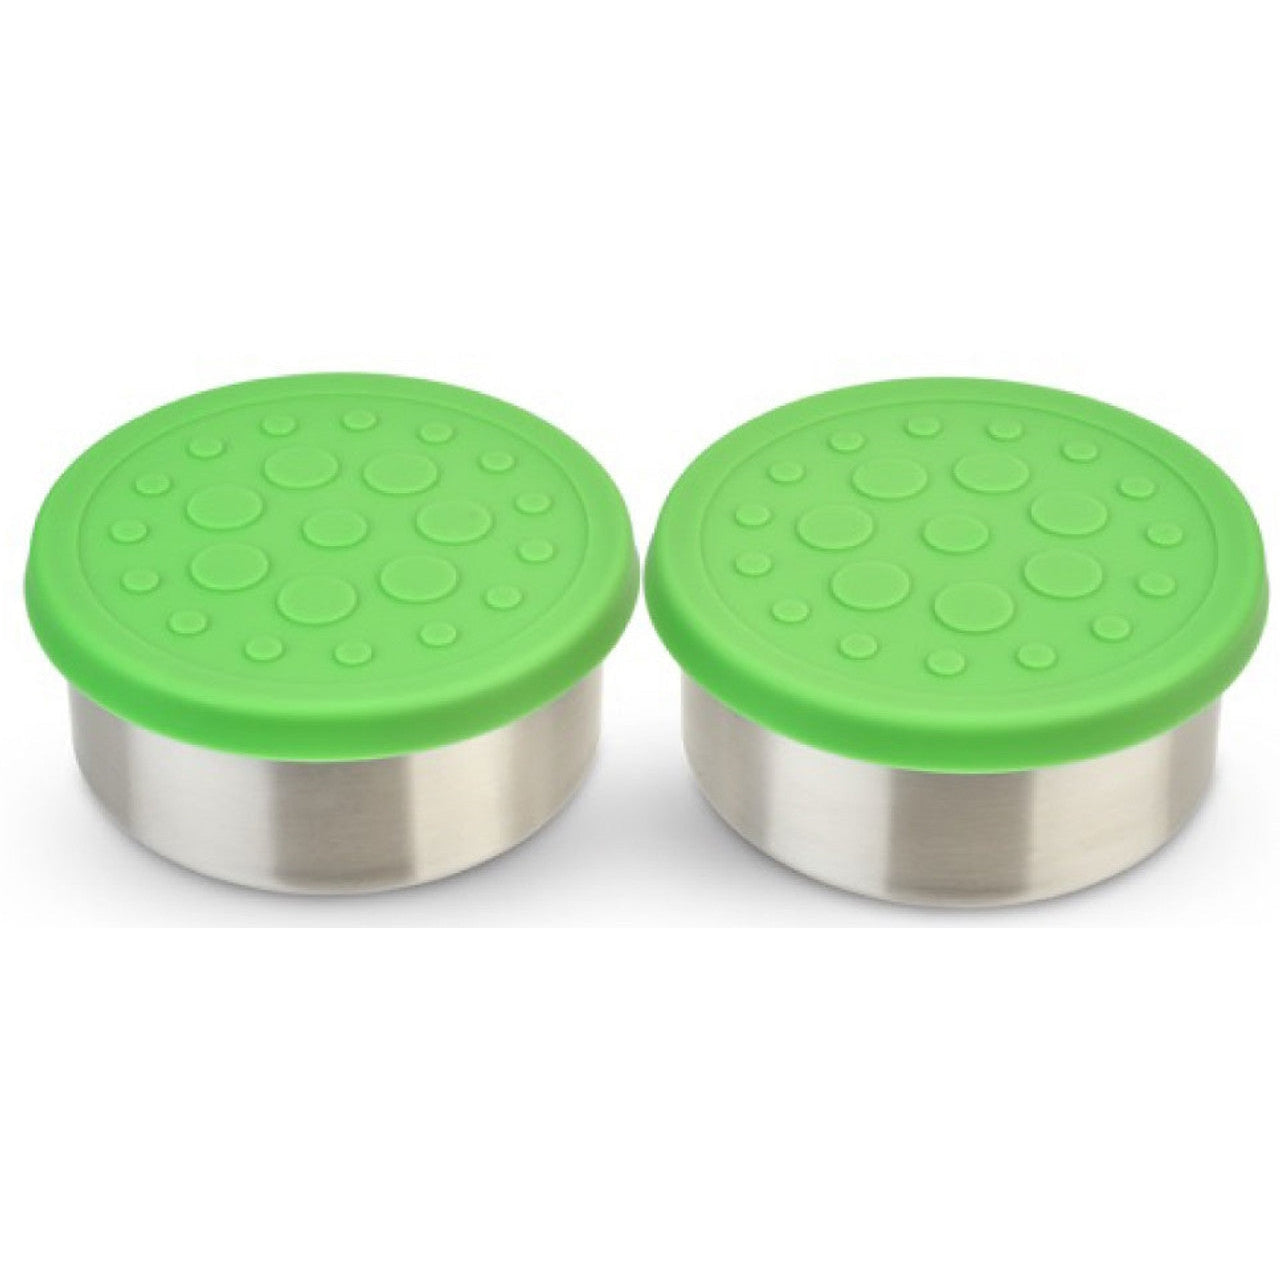 https://cdn.shopify.com/s/files/1/1371/1579/files/lunchbots-4_5oz-large-stainless-steel-dip-containers-with-silicone-lids-set-of-2-assorted-colours-lunchbots_1600x.jpg?v=1689966788